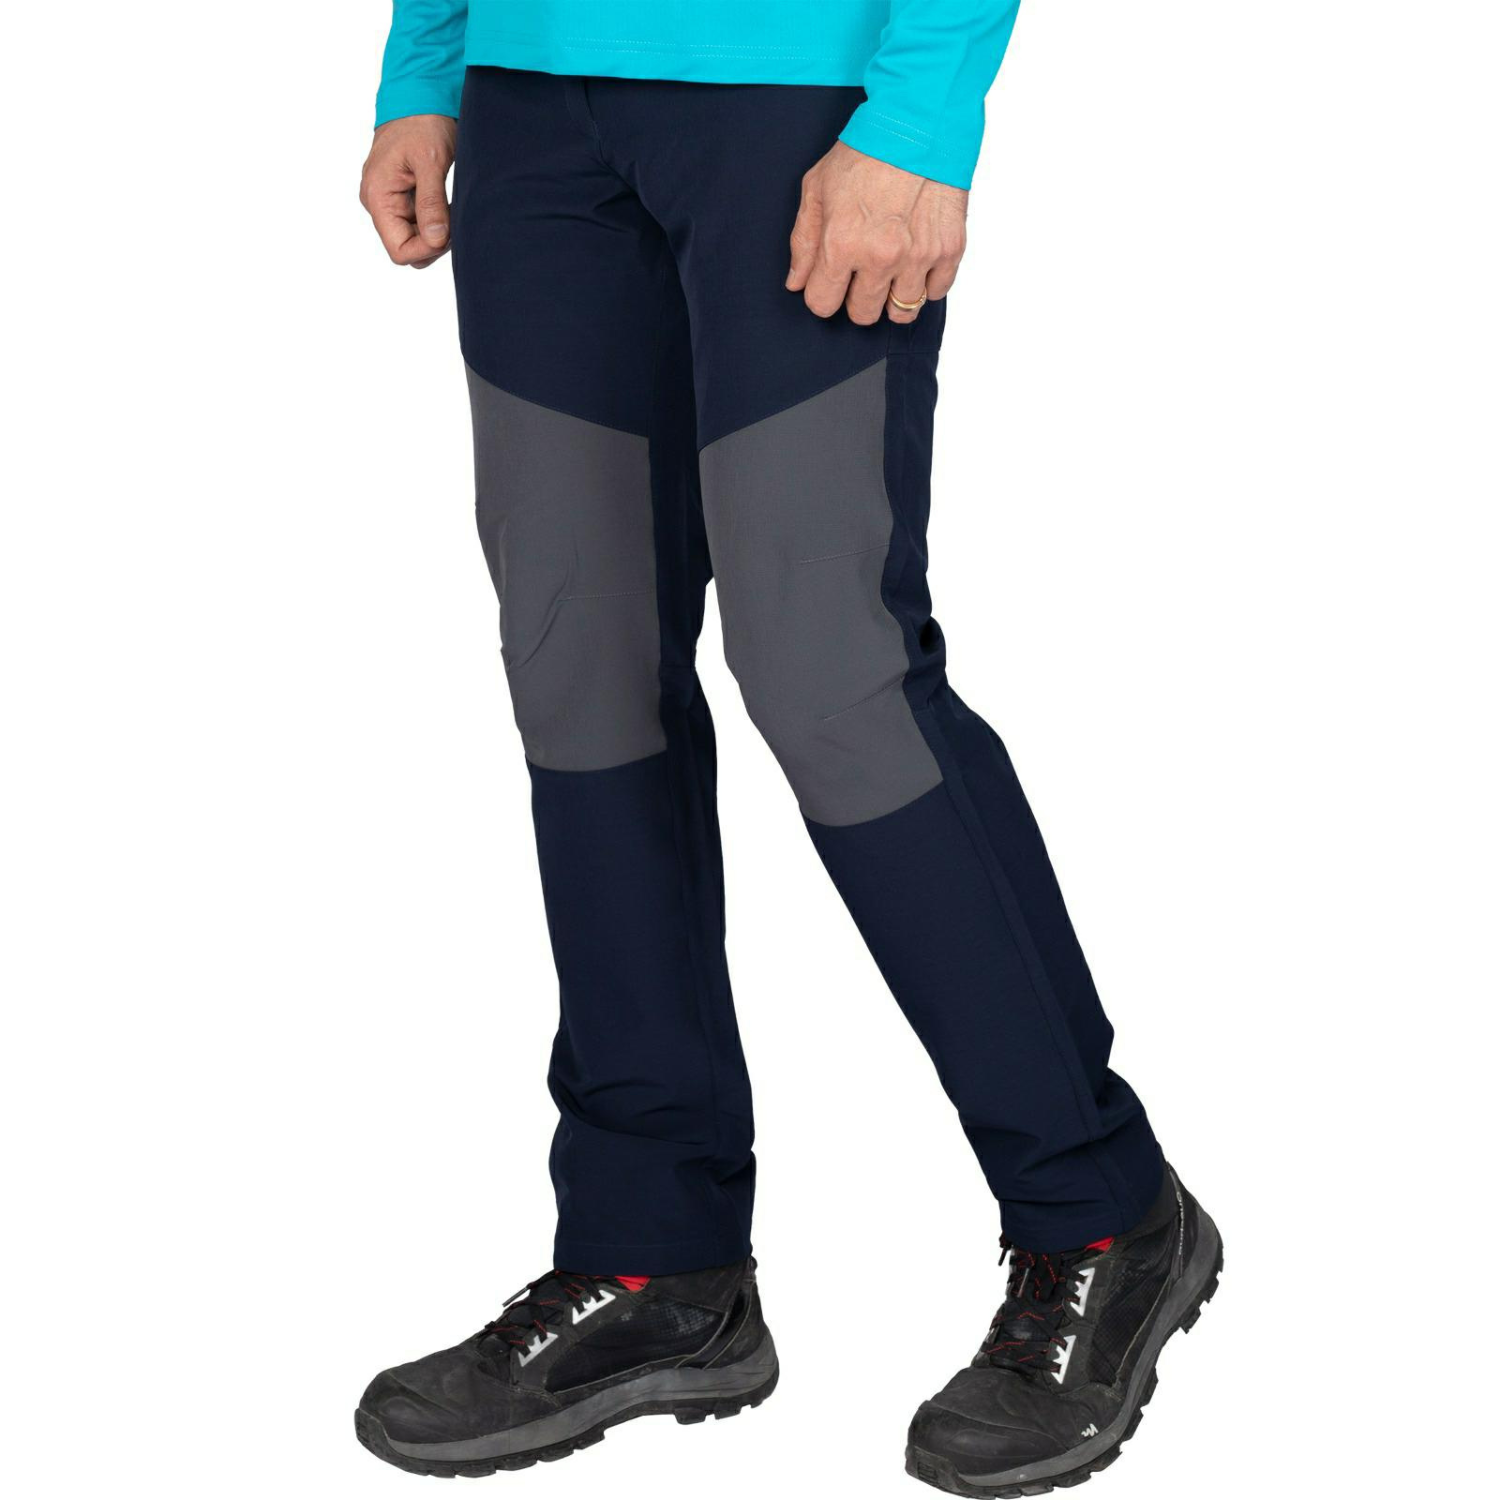 Buy Kaza All Weather Trekking Pants at Gokyo Outdoor Clothing & Gear